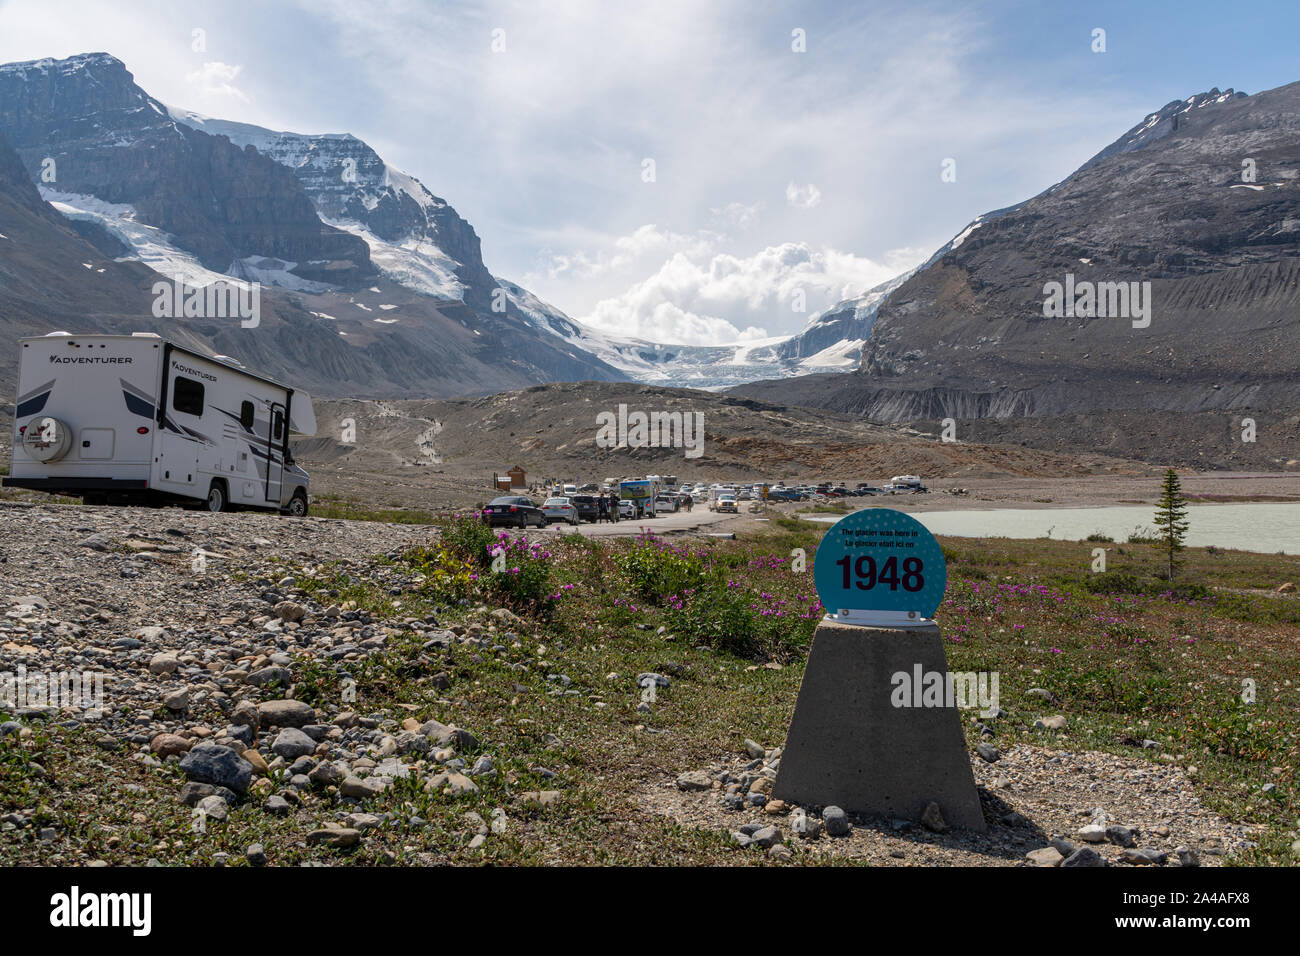 Columbia Icefield, Canada - August 10, 2019: Road to the glacier with trailers and sign to demonstrate glacier shrinking Stock Photo